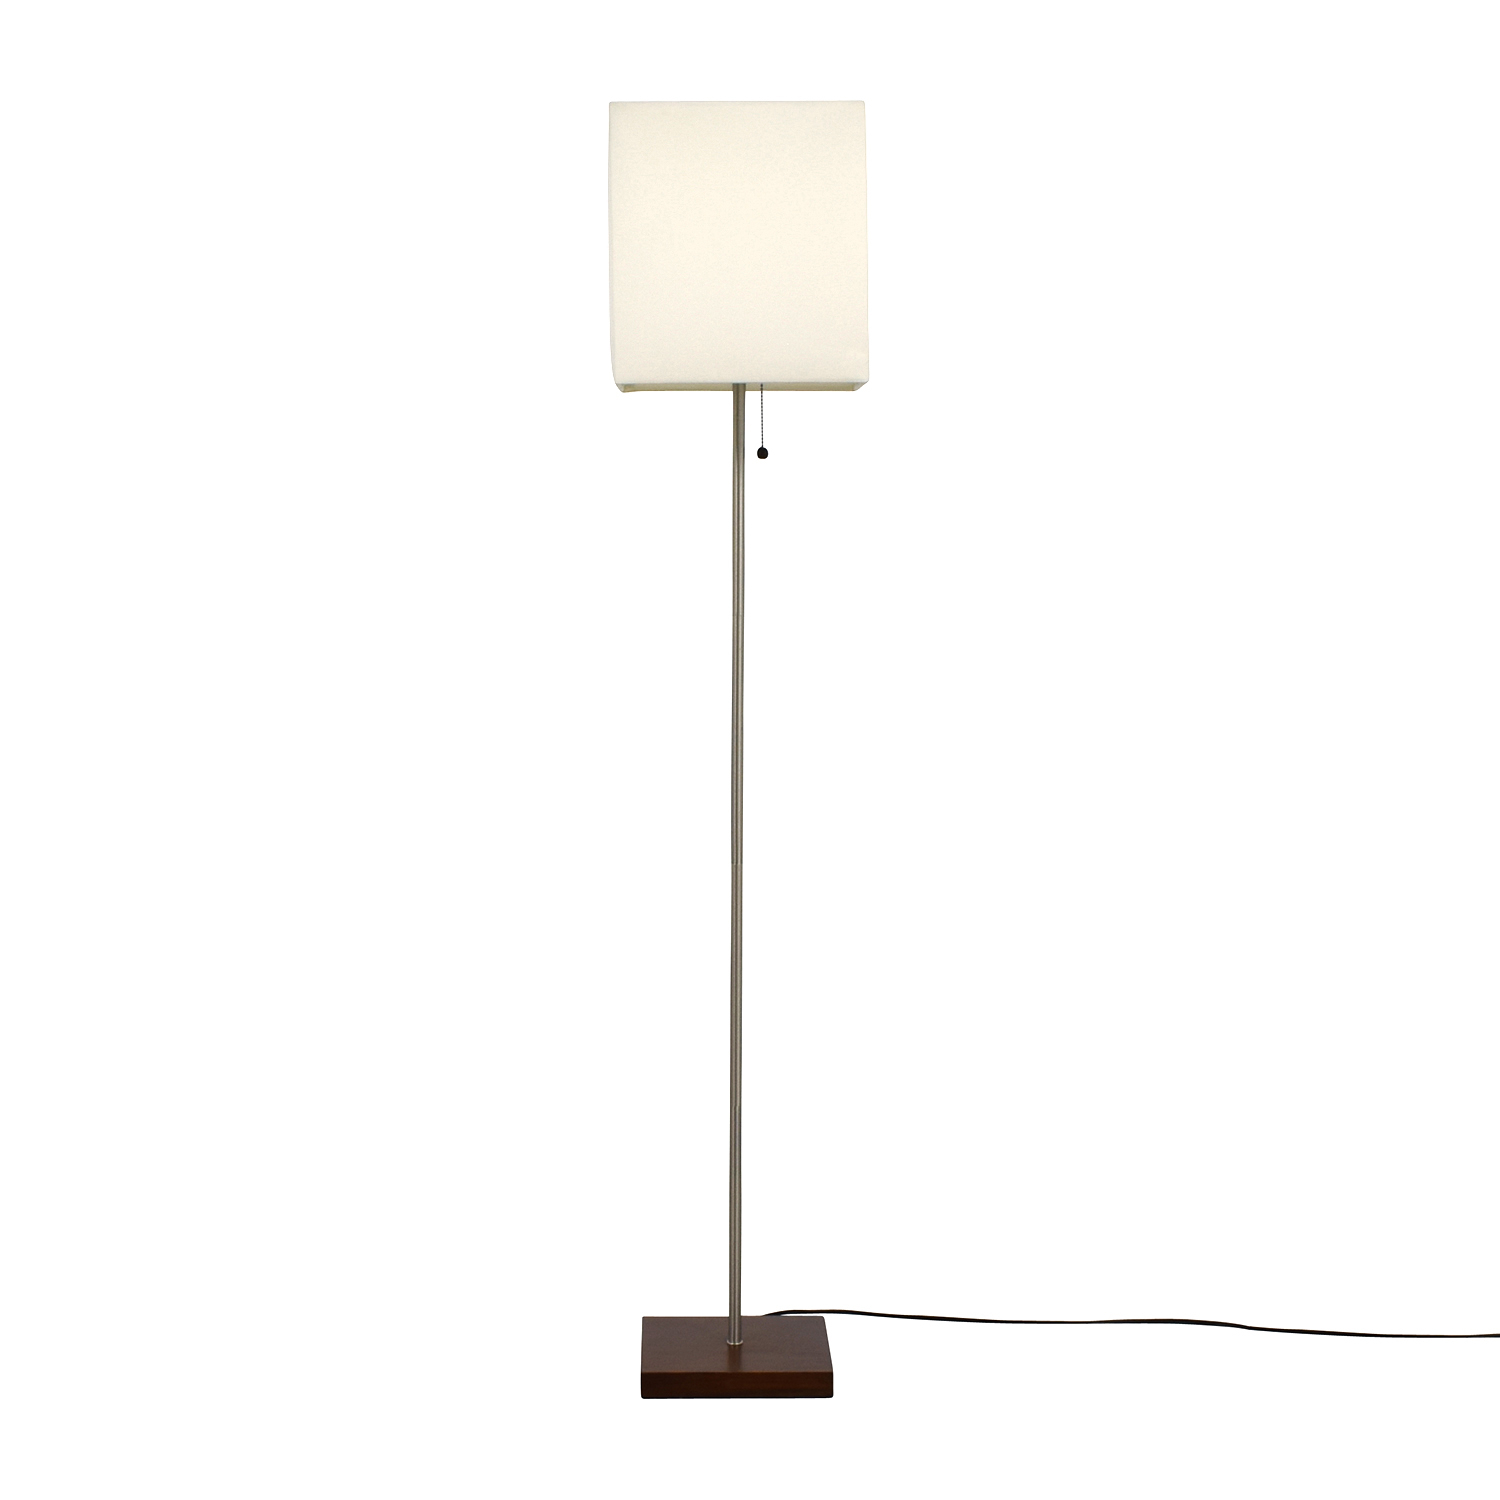 25 Off Target Target Classic Silver Floor Lamp Decor throughout size 1500 X 1500